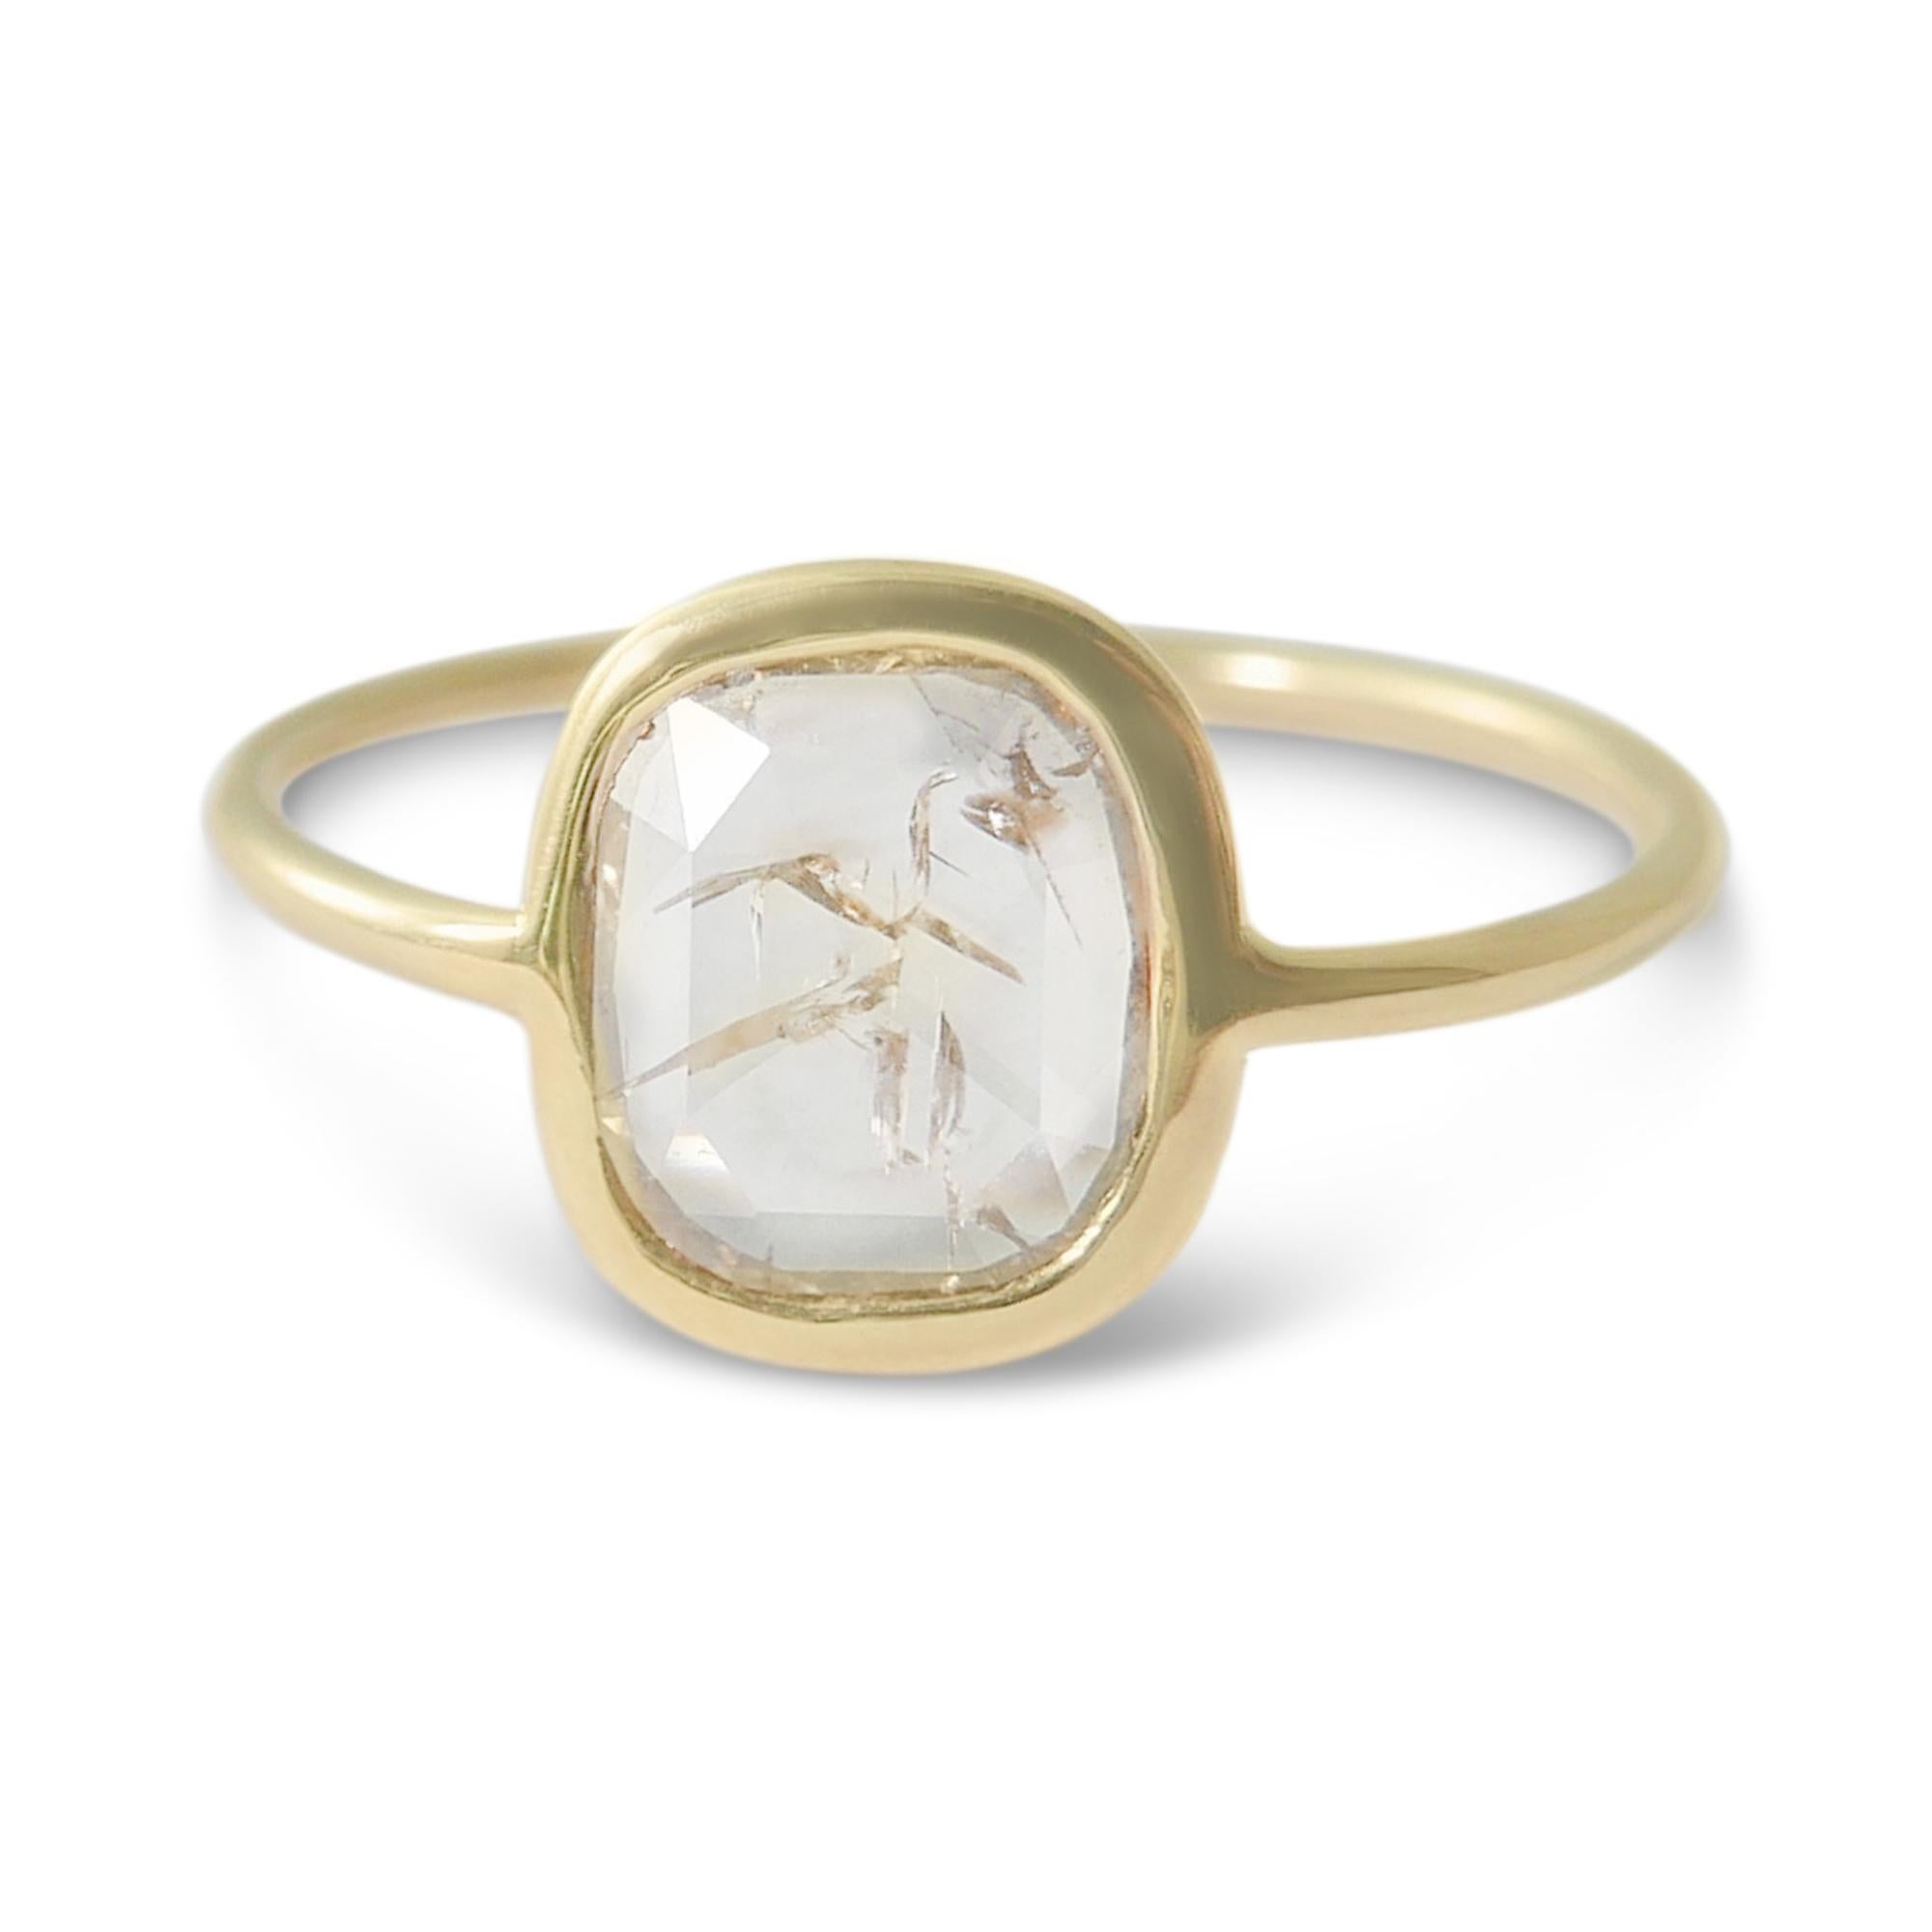 This diamond ring features a pale cognac oval shaped rosecut diamond set in a 18-karat yellow gold bezel on a slim band.  Weighing approximately 0.8 carat, the diamond is a rustic rosecut stone in a slightly squared oval shape and contains unique